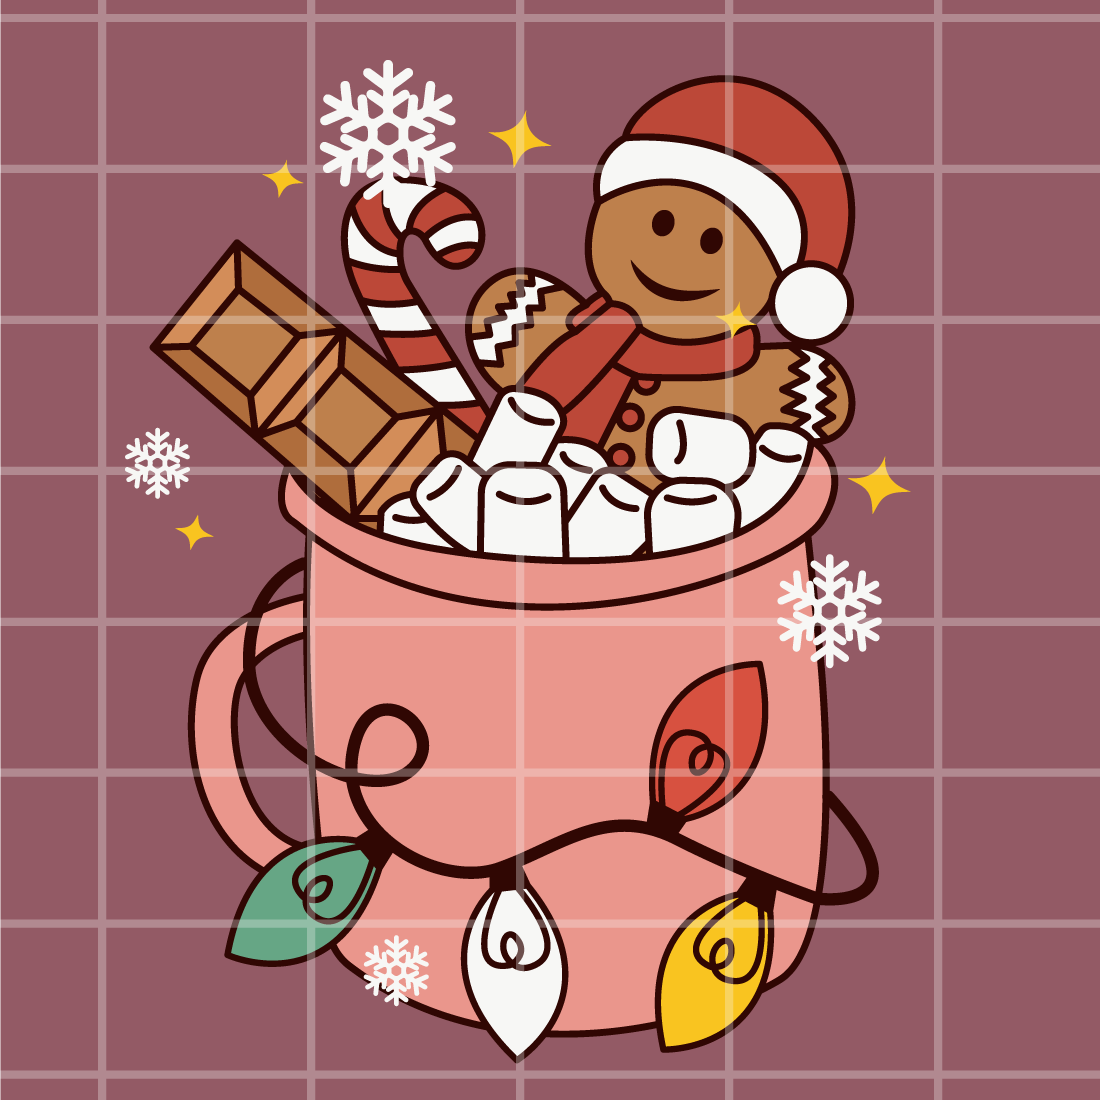 Retro Christmas Gingerbread Cookie cover image.